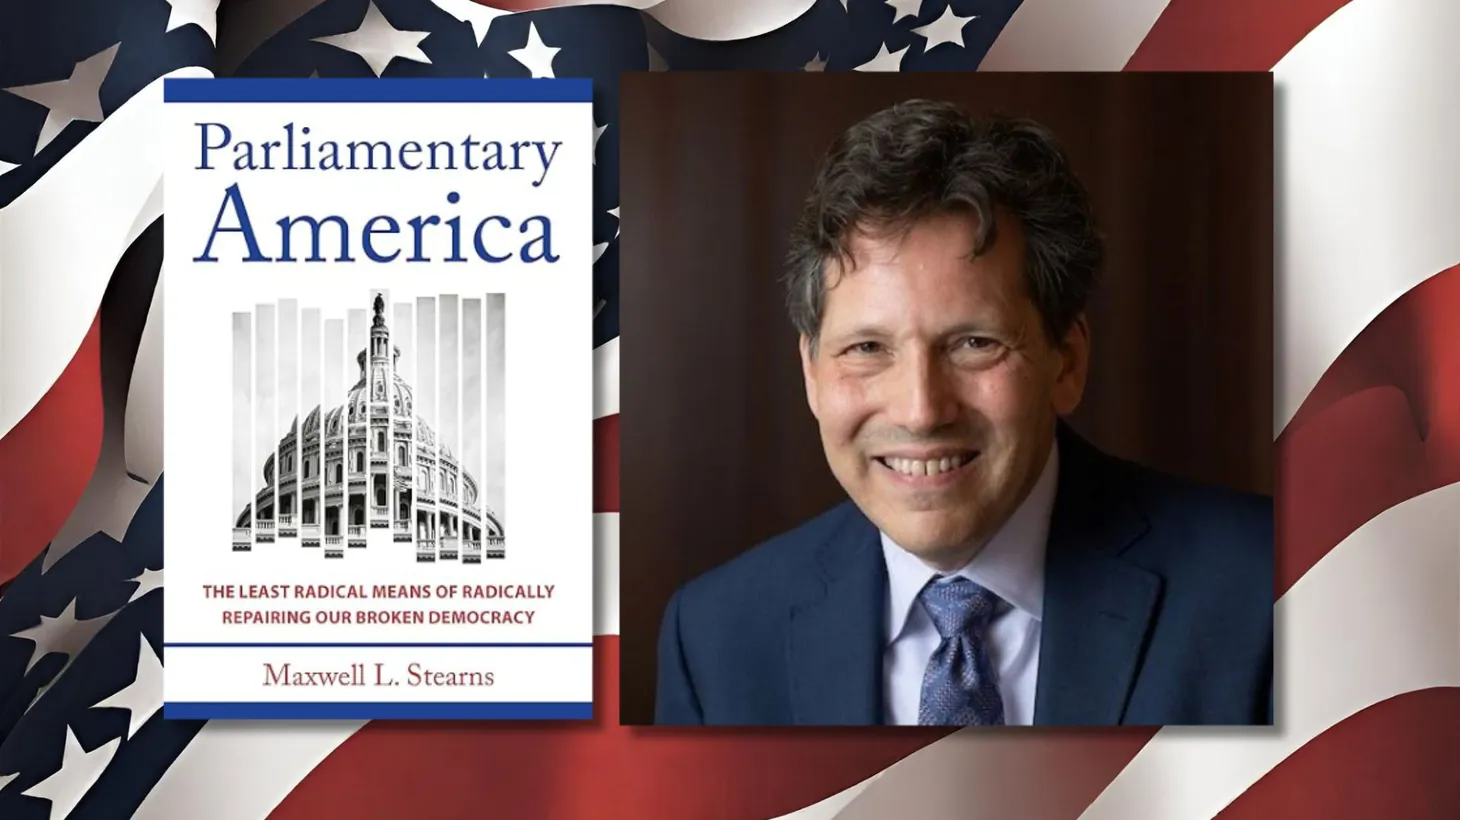 Maxwell L. Stearns discusses his book, “Parliamentary America: The Least Radical Means of Radically Repairing Our Broken Democracy.”